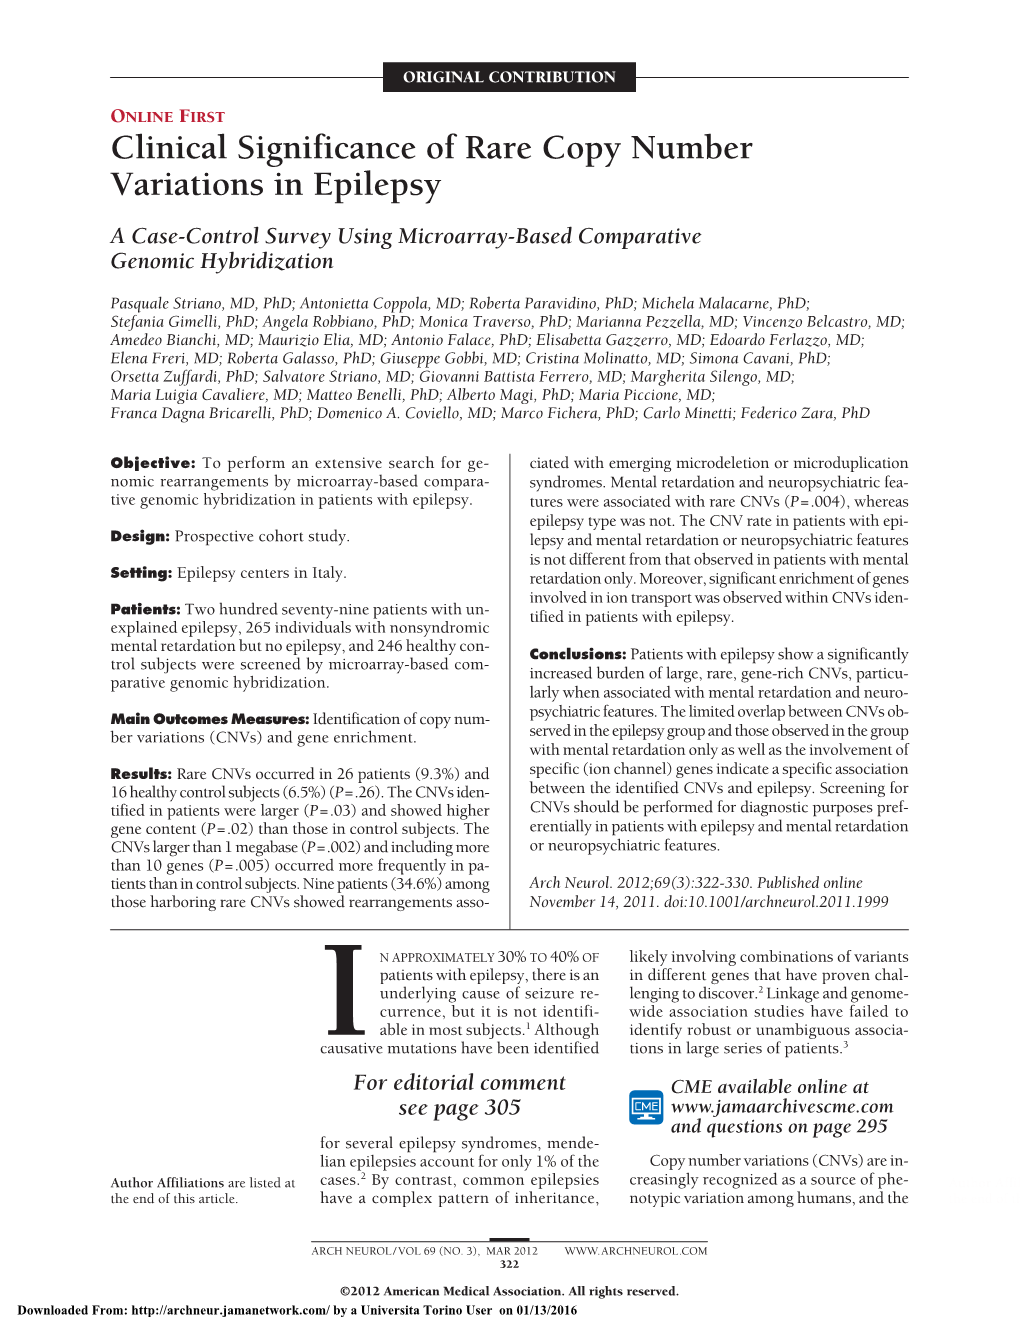 Clinical Significance of Rare Copy Number Variations in Epilepsy:€€A